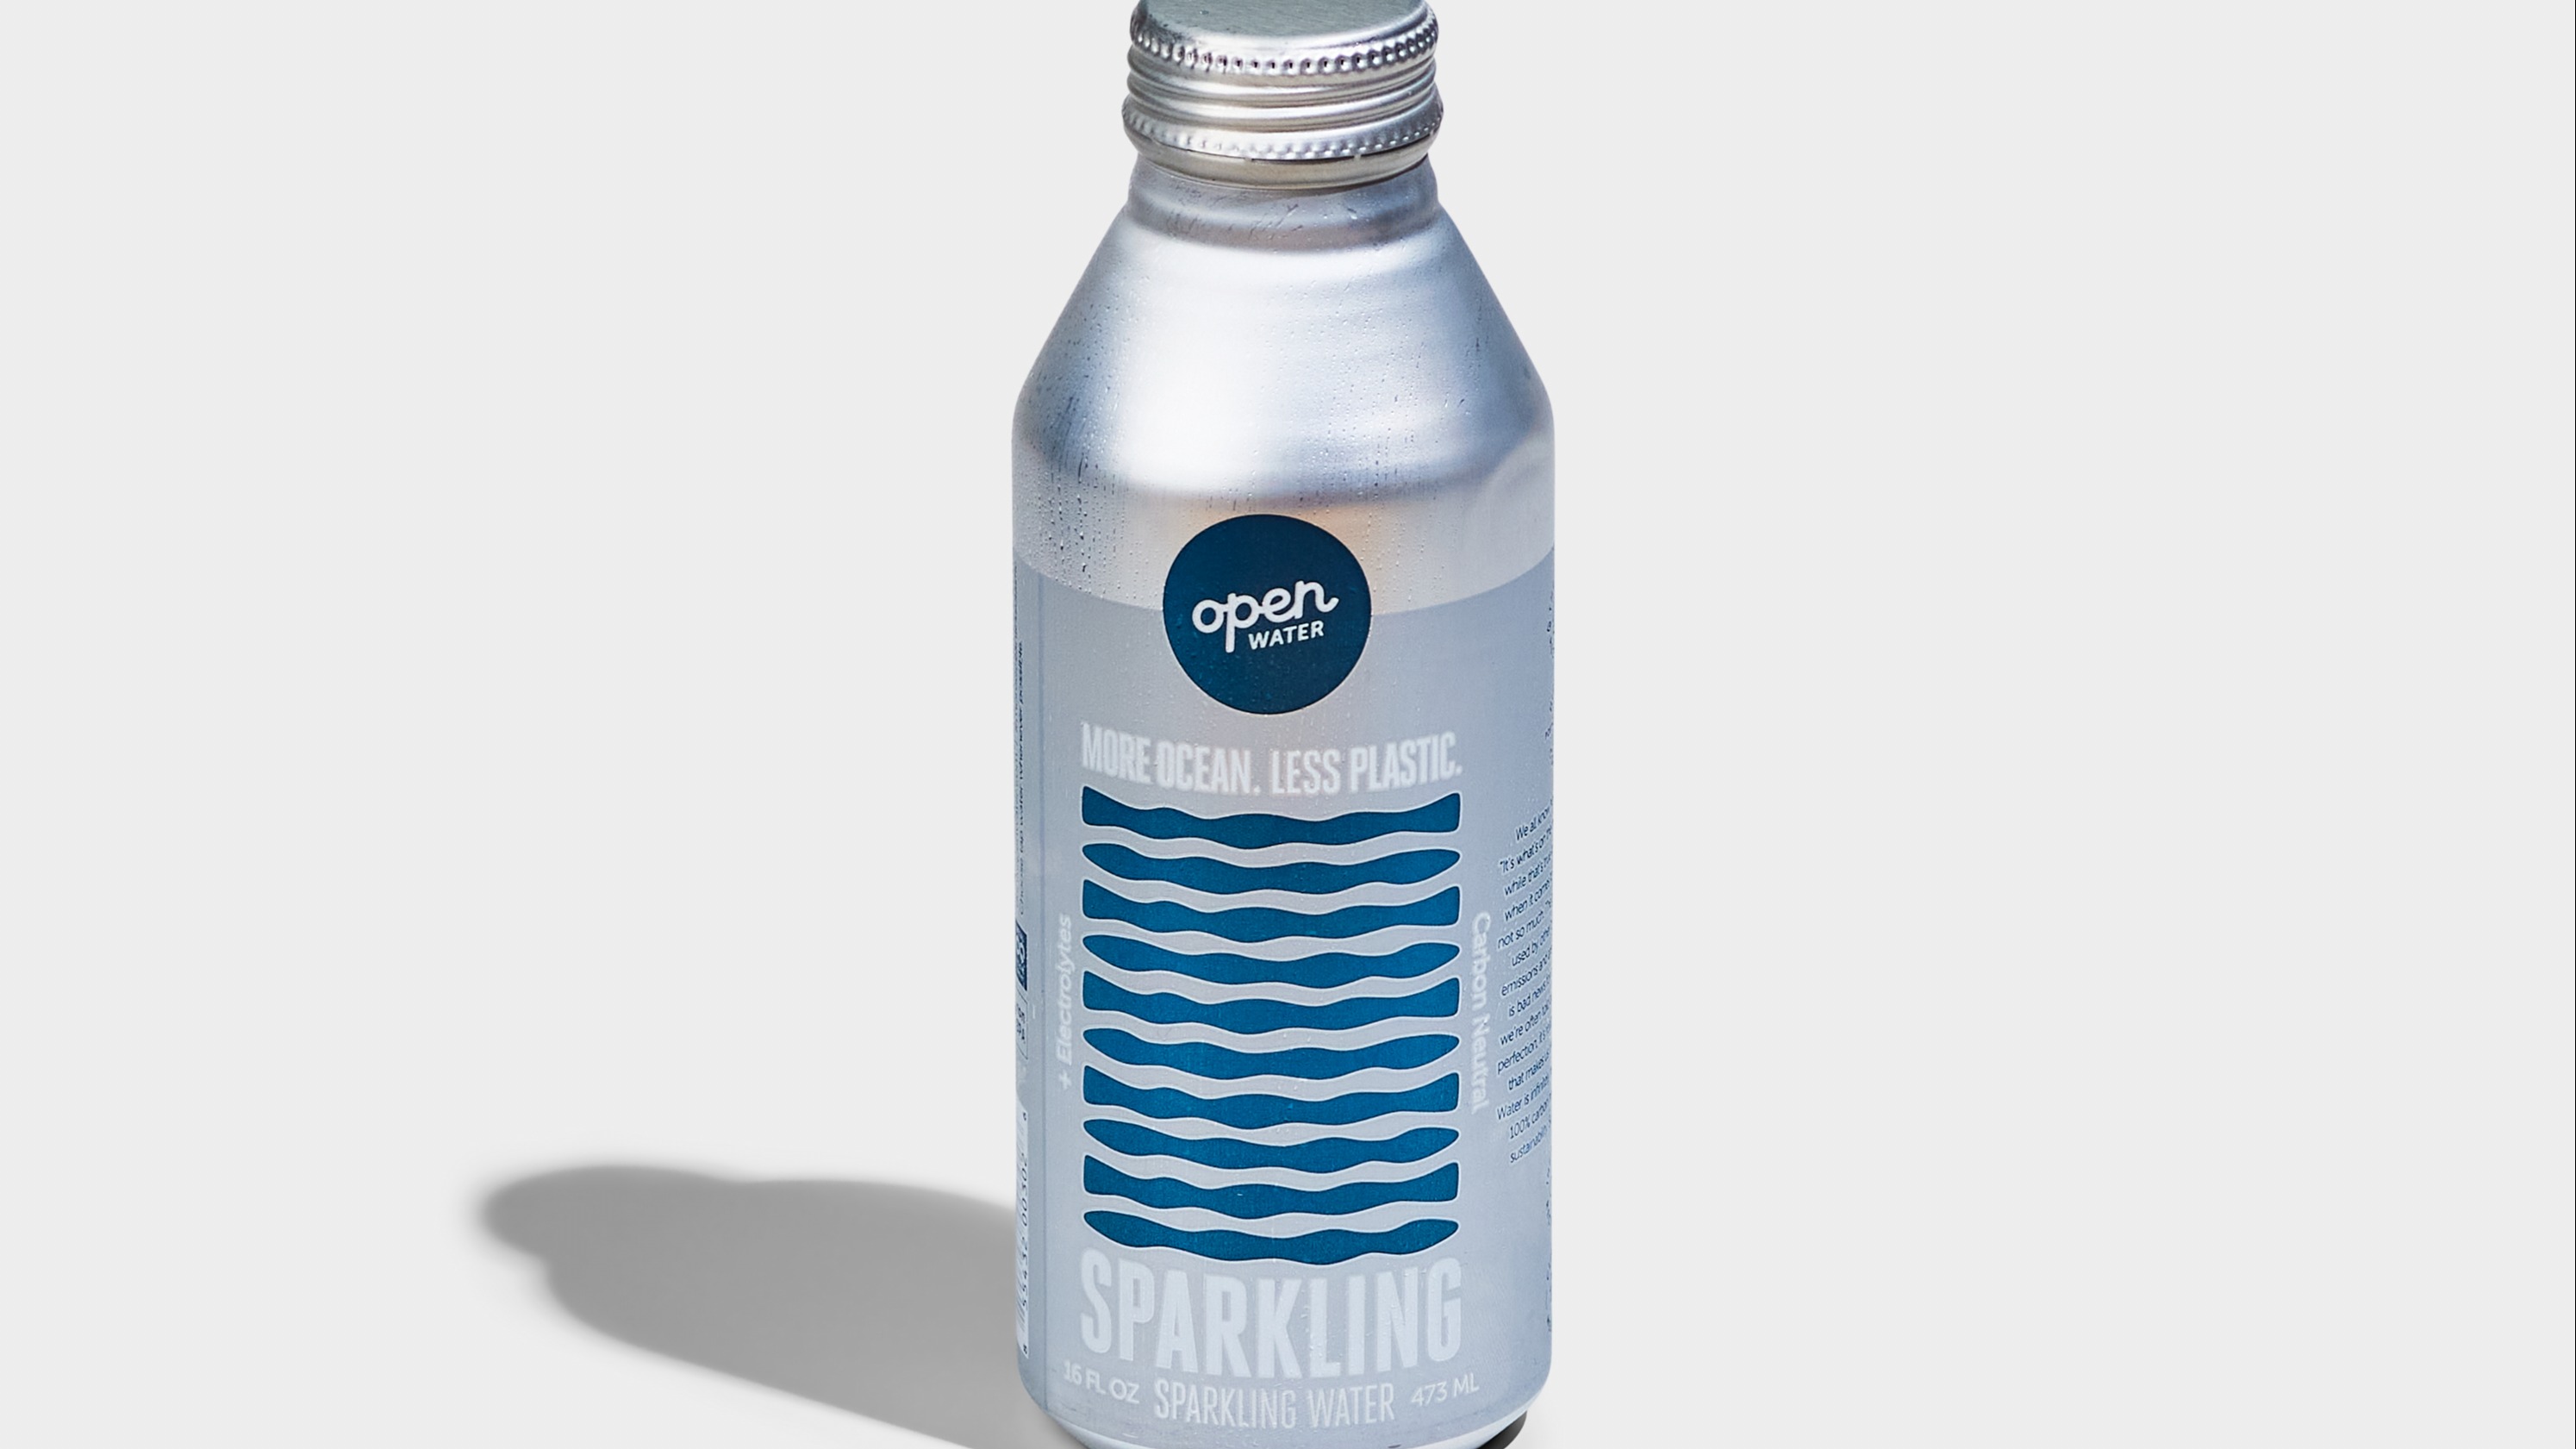 Open Purified Sparkling Water